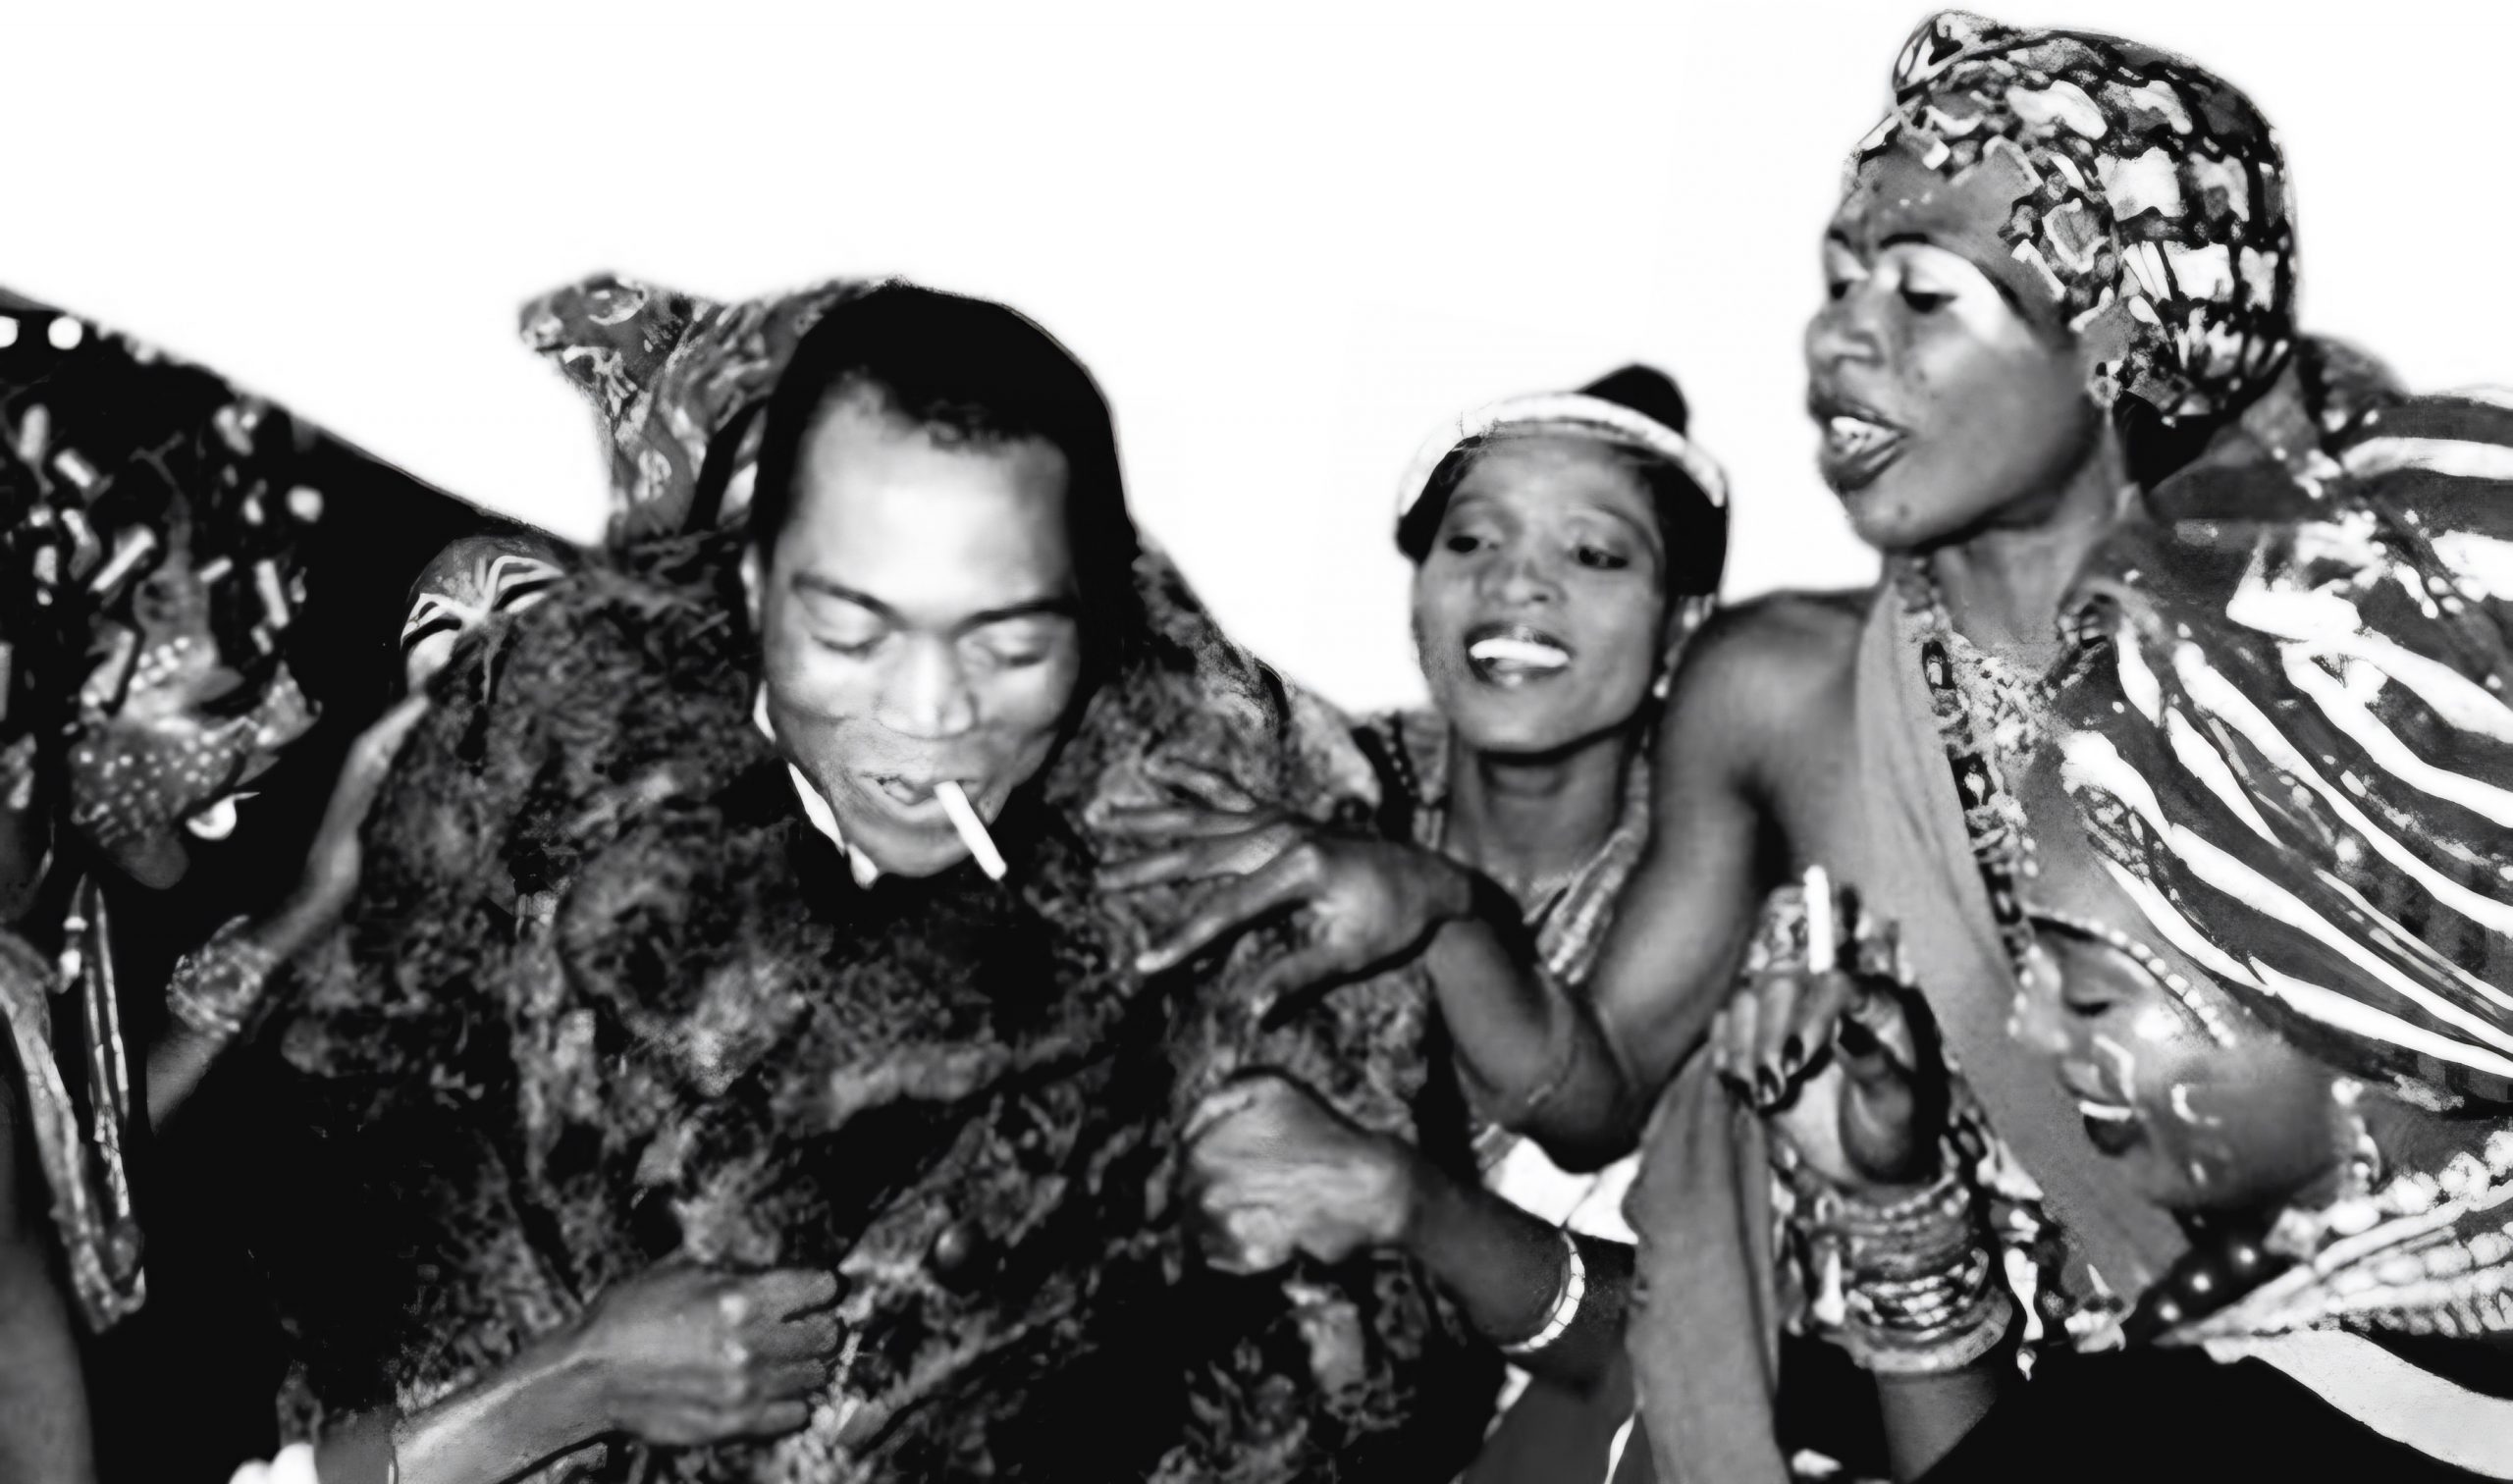 THE UNTOLD STORY OF HOW AND WHY FELA KUTI MARRIED 27 WOMEN ON THE SAME DAY IN 1978 (A must read)